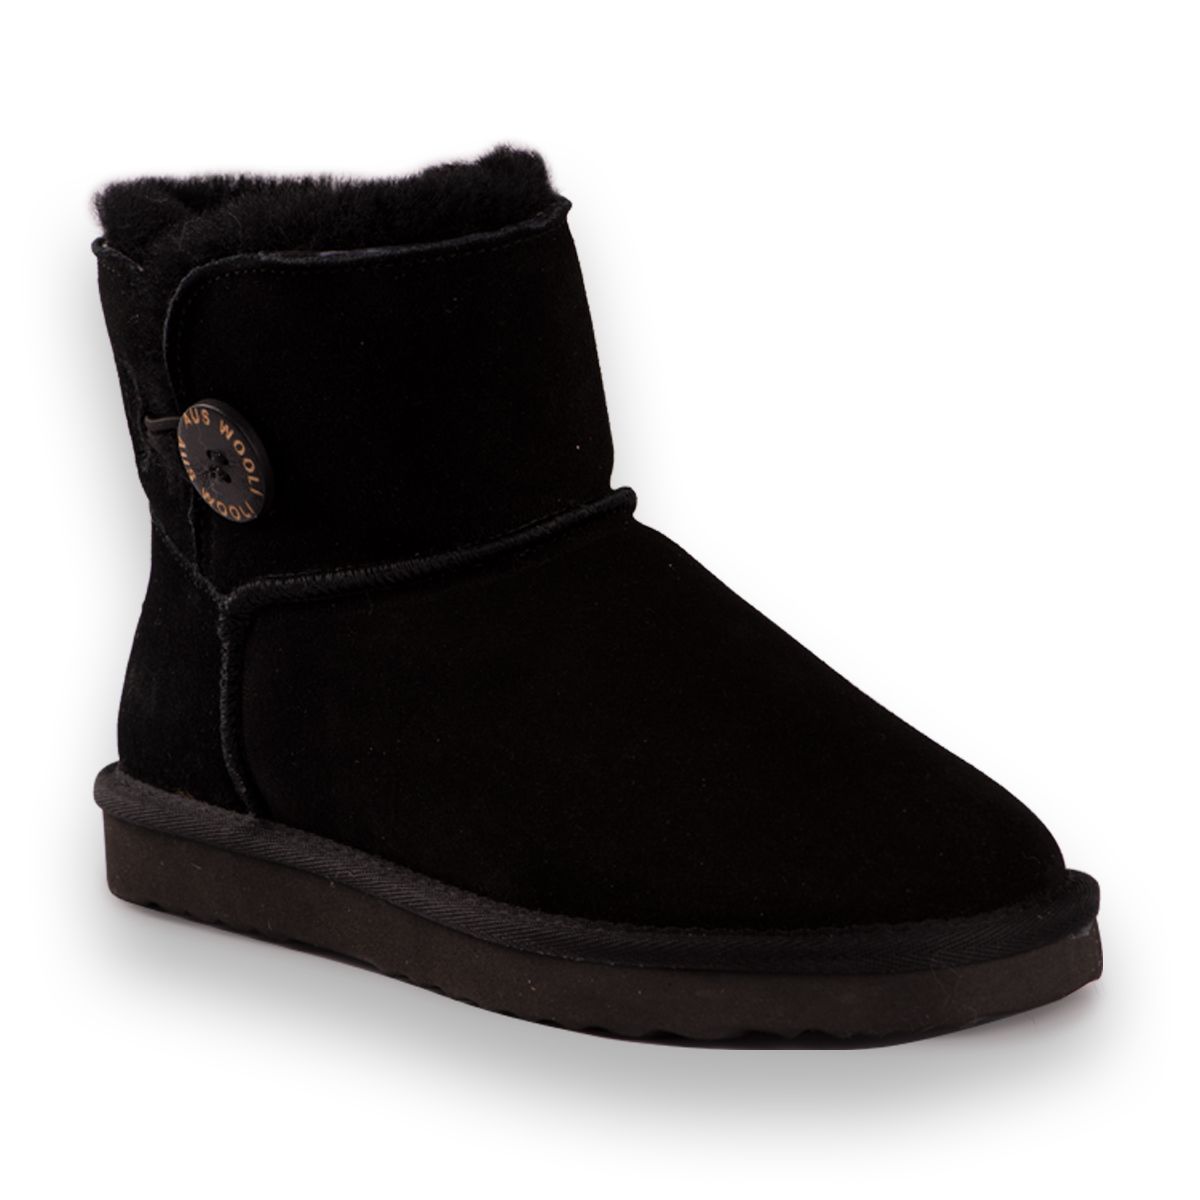 Button featured sheepskin boot – easy to slip on

Full leather Suede upper -Water Resistant
Soft premium genuine Australian Sheepskin wool lining 
Sustainably sourced and eco-friendly processed 
Unisex boots – button trim for that extra fashion kick 
Rubber High-density EVA blend outsole - making it lighter, softer and more durable 
Double stitching and reinforced heel 
Sheepskin breathes allowing feet to stay warm in winter and cool in summer 
100% brand new and high quality, comes in a branded box, suitable for a gift